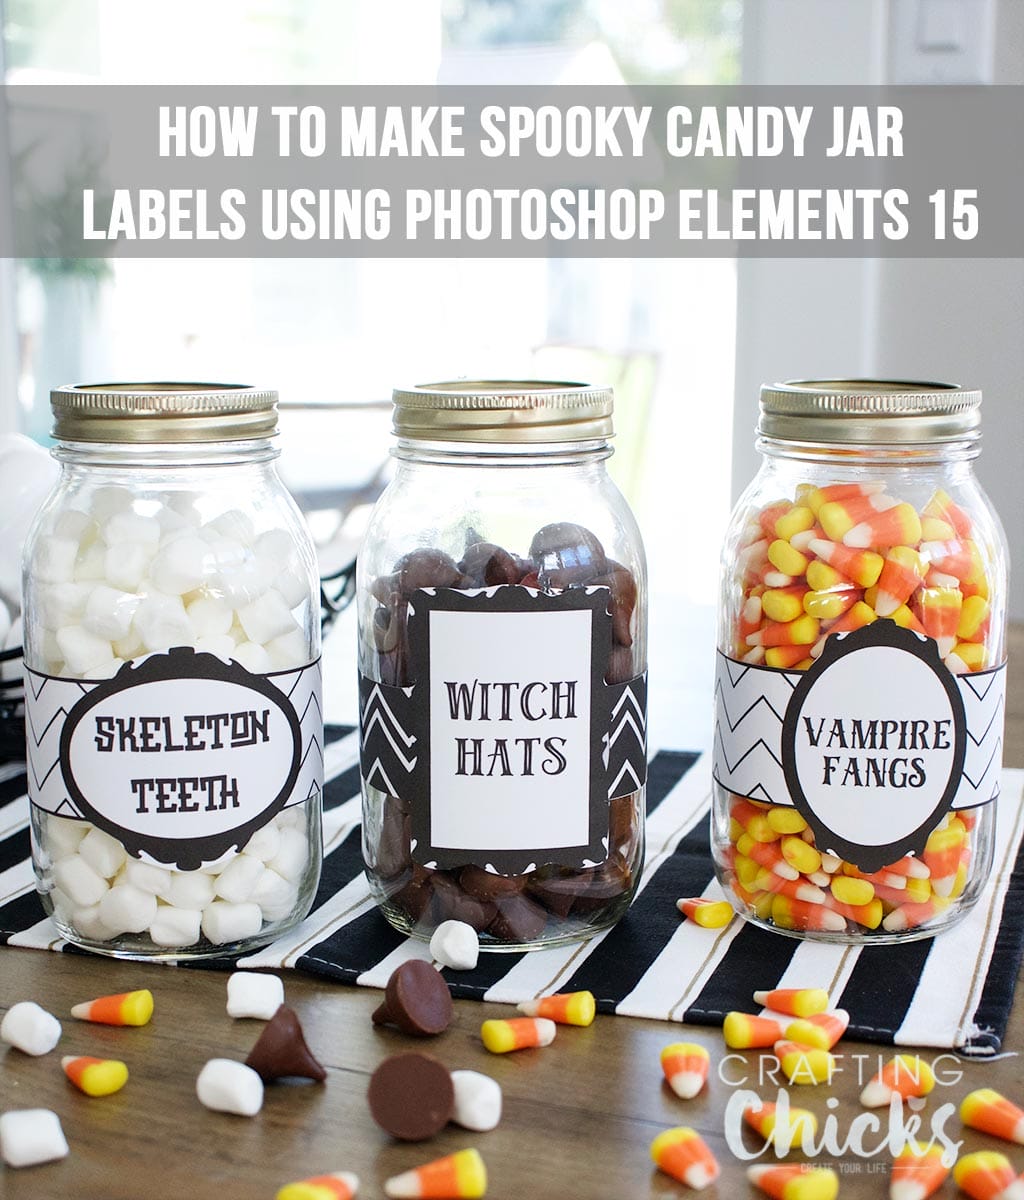 Creating Spooky Halloween Candy Labels in Photoshop Elements 15